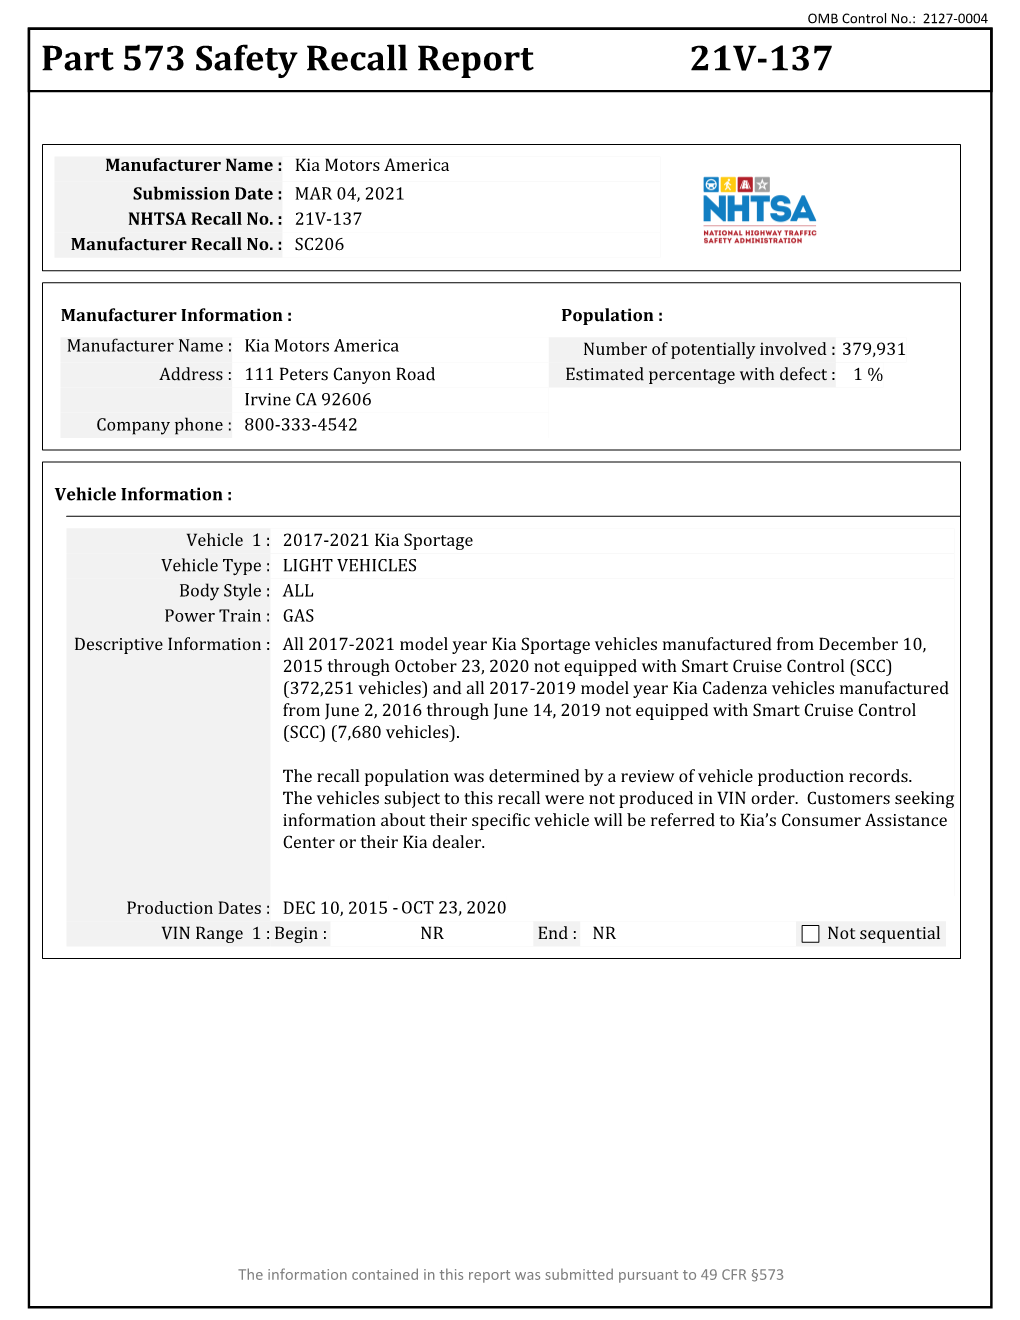 Part 573 Safety Recall Report 21V-137